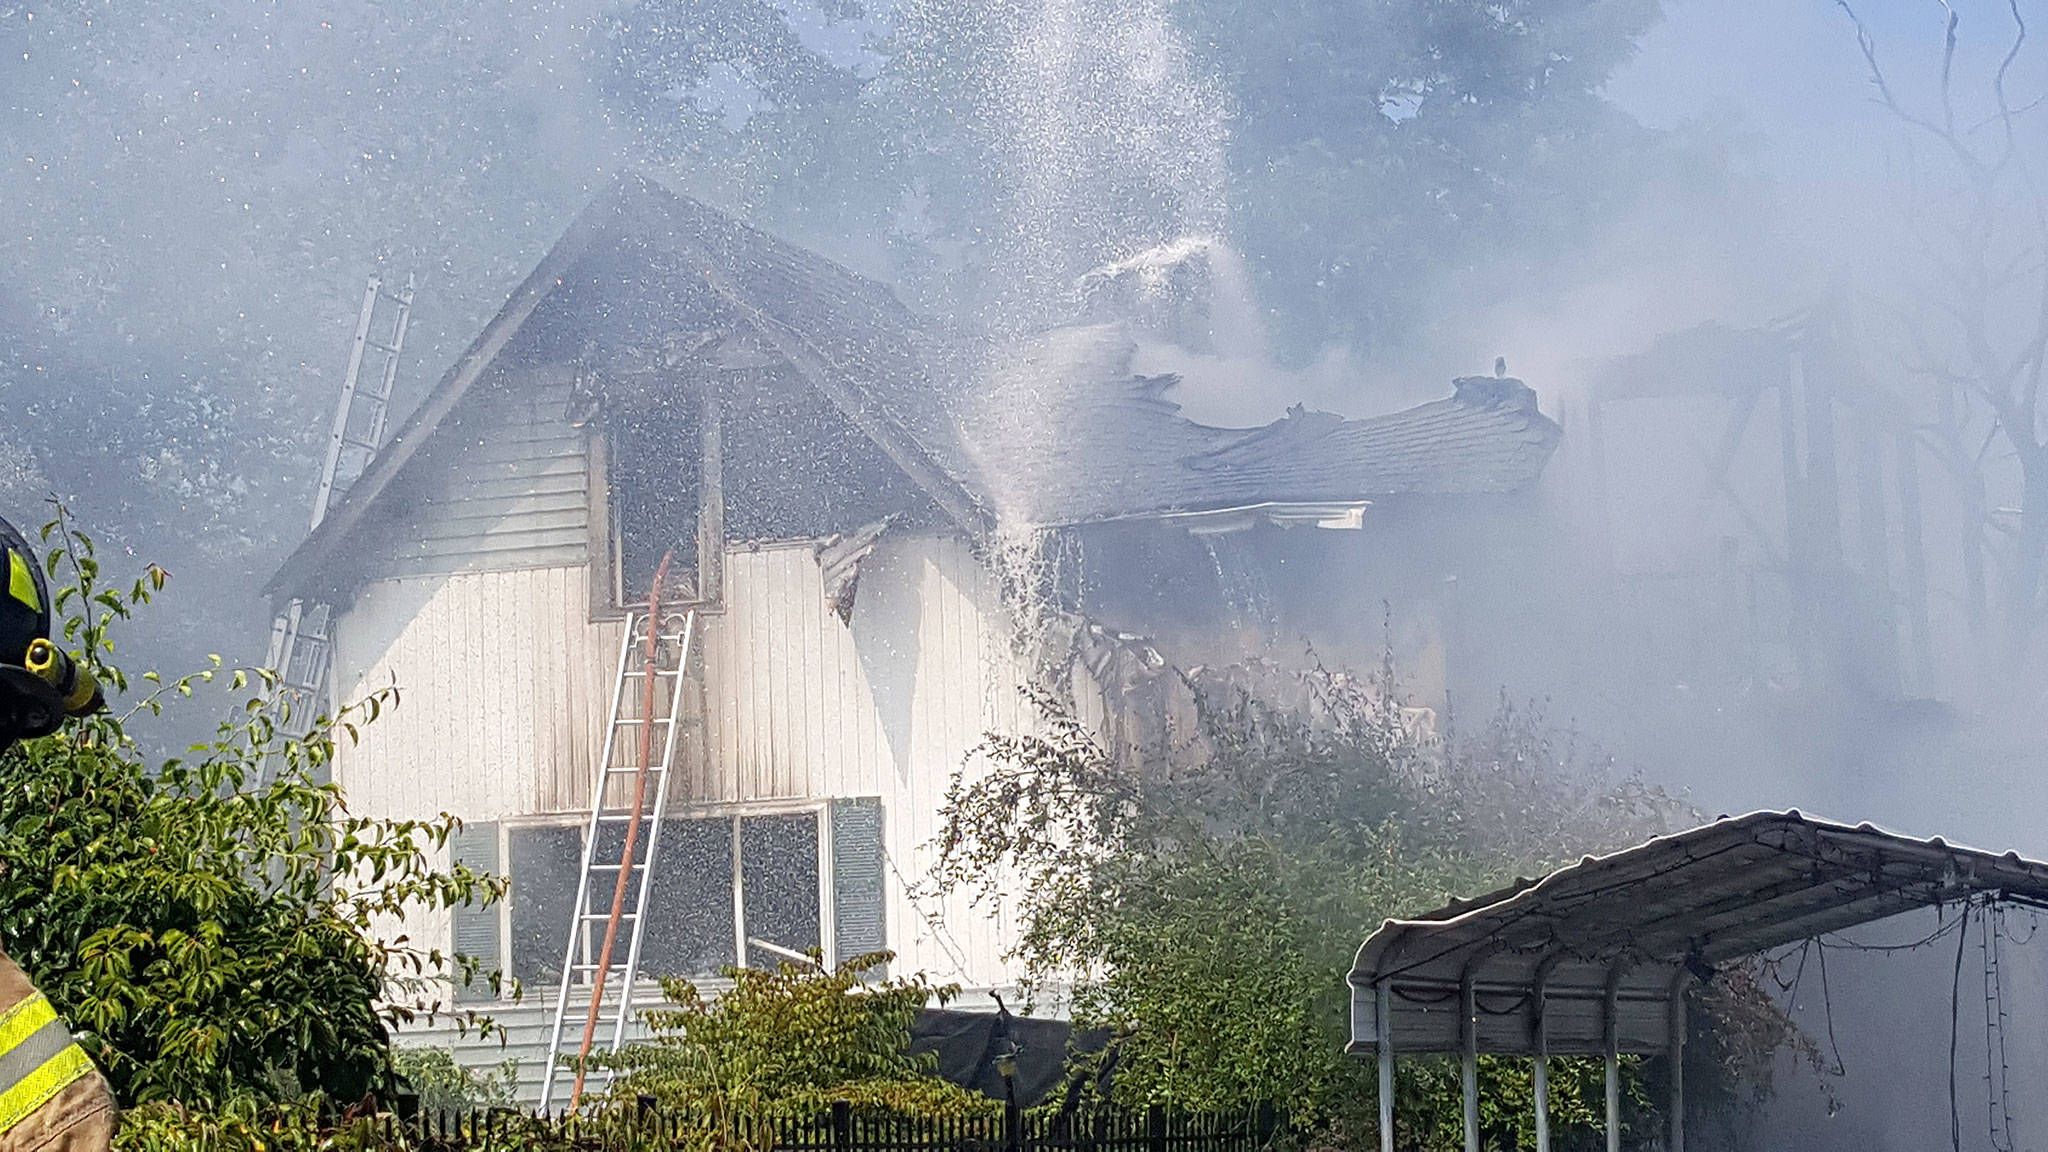 Port Orchard house destroyed by fire; no injuries reported